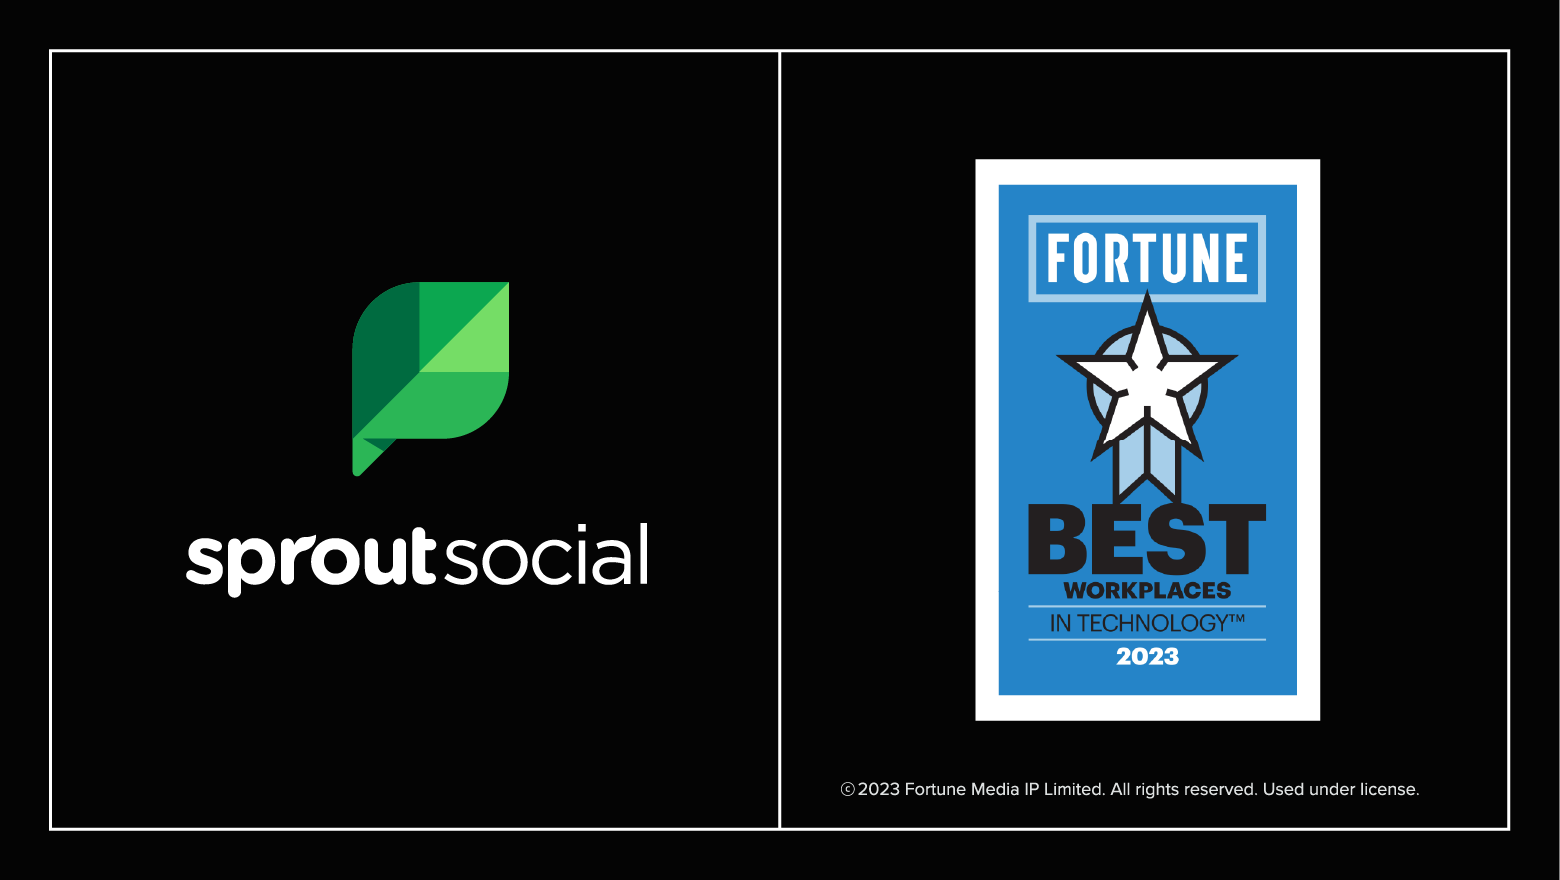 An image of the Sprout Social logo and the 2023 Fortune Best Workplaces in Technology logo side-by-side.